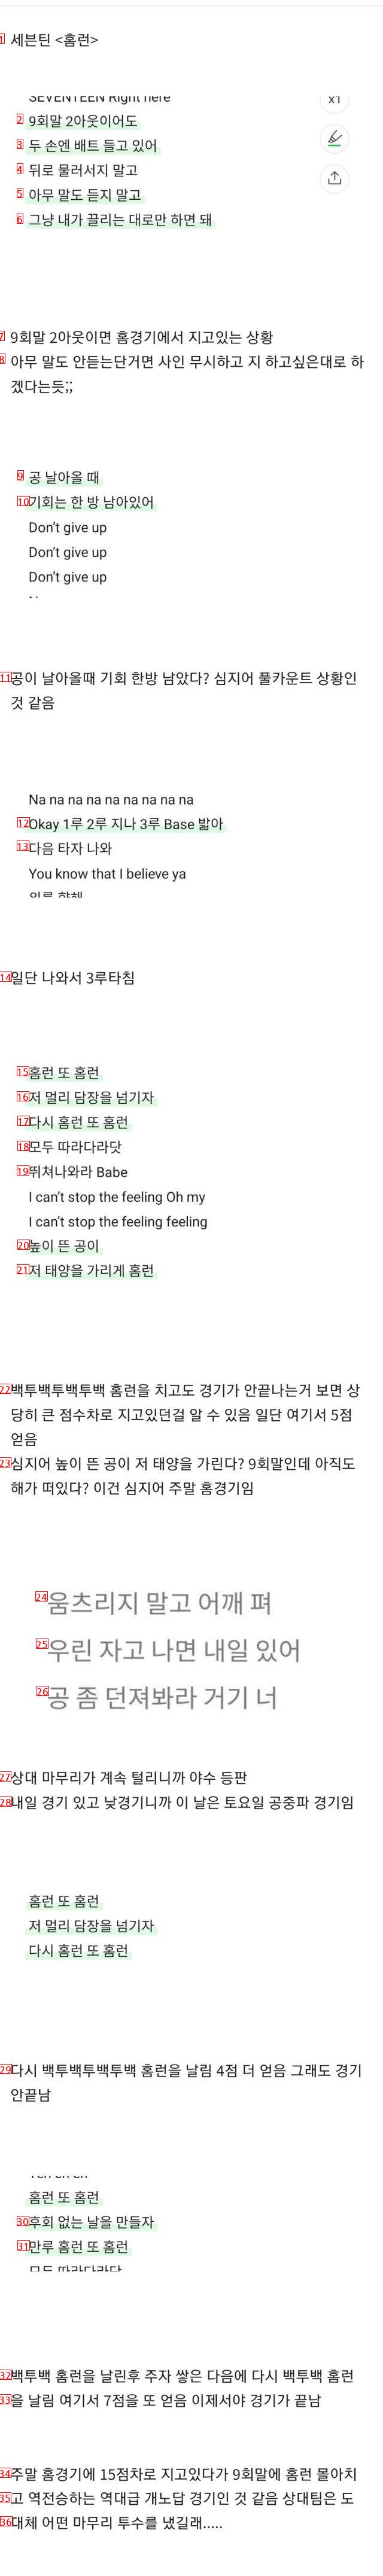 The lyrics of an idol song that was controversial among baseball fans, saying it's ridiculous